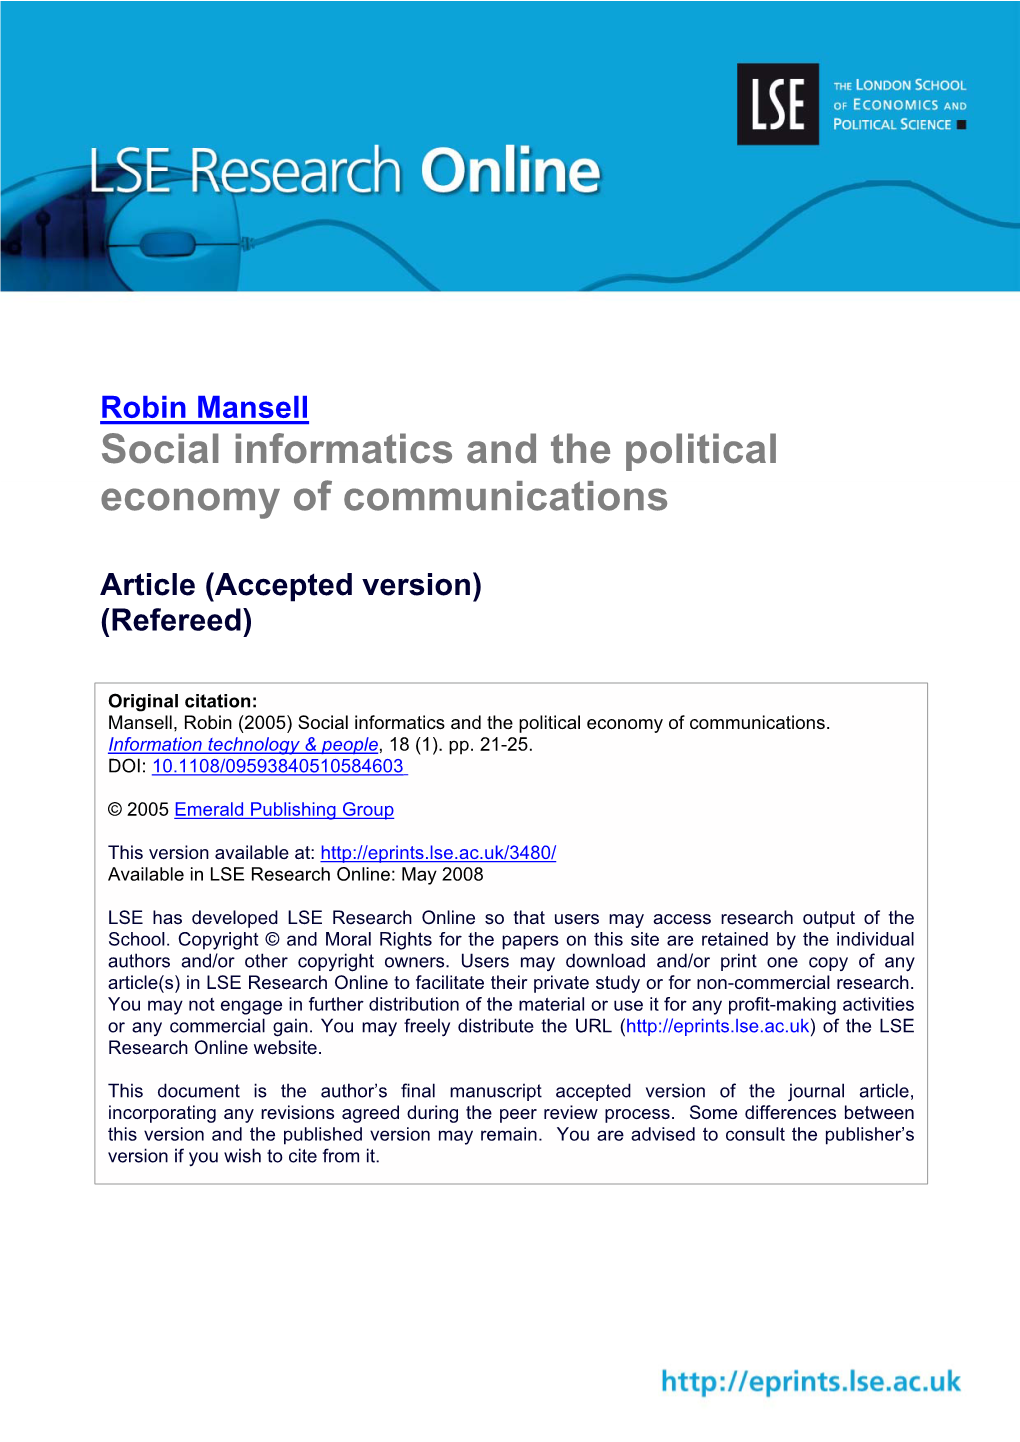 Social Informatics and the Political Economy of Communications